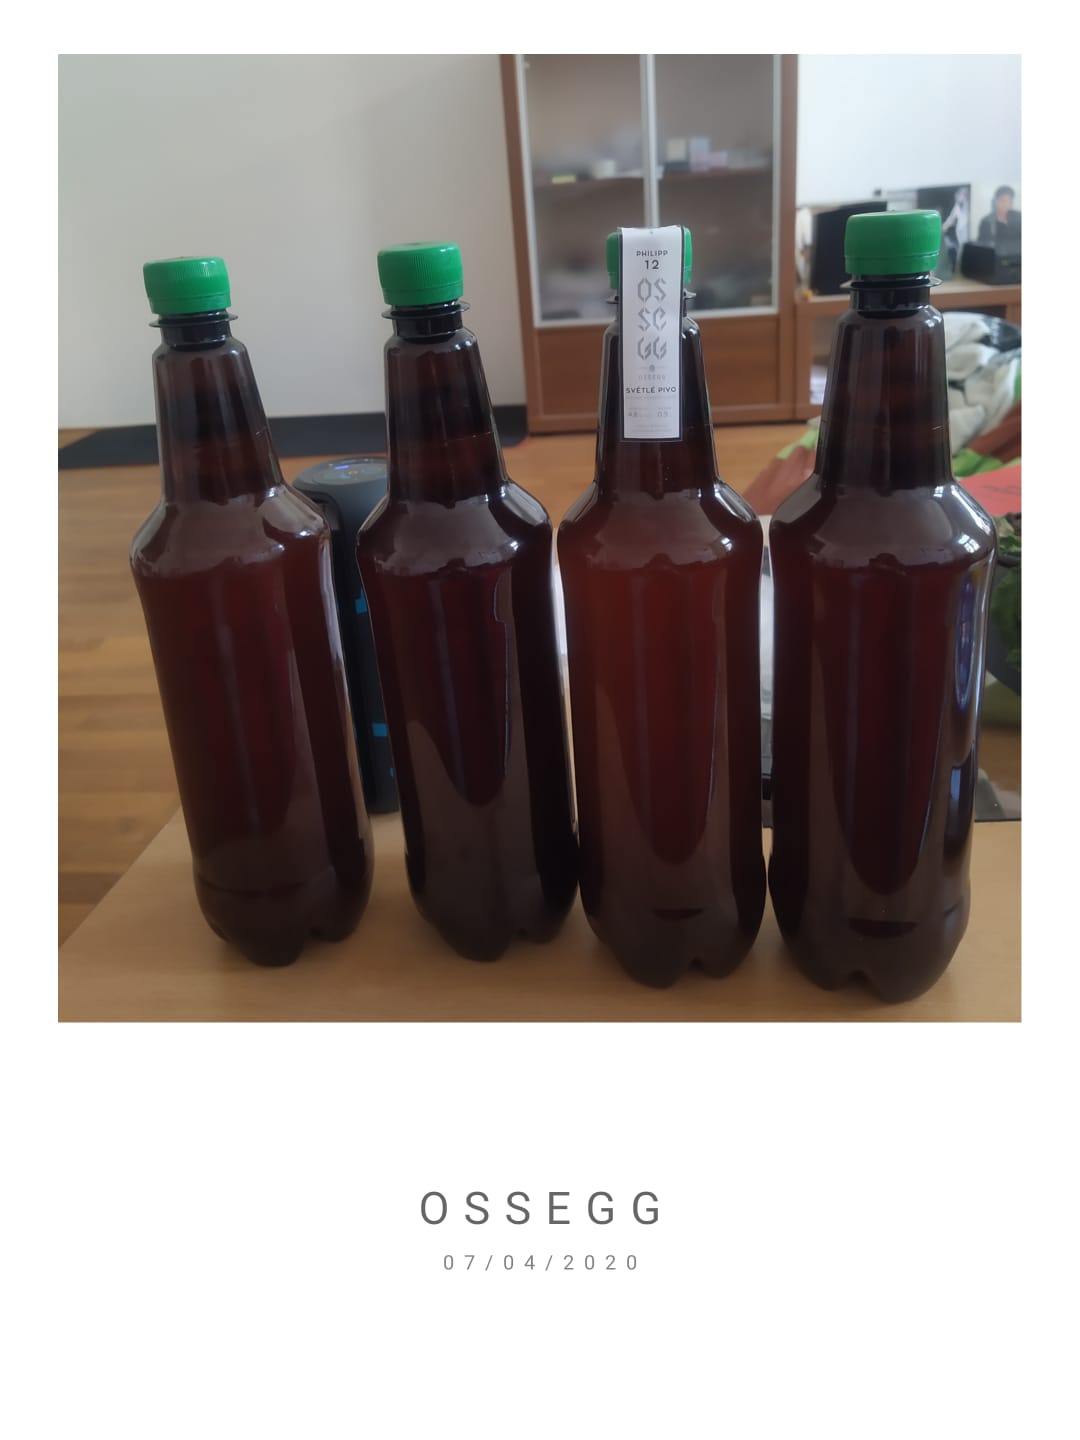 Beer bottles from our Prague City guide Lenka’s favourite Ossegg microbrewery